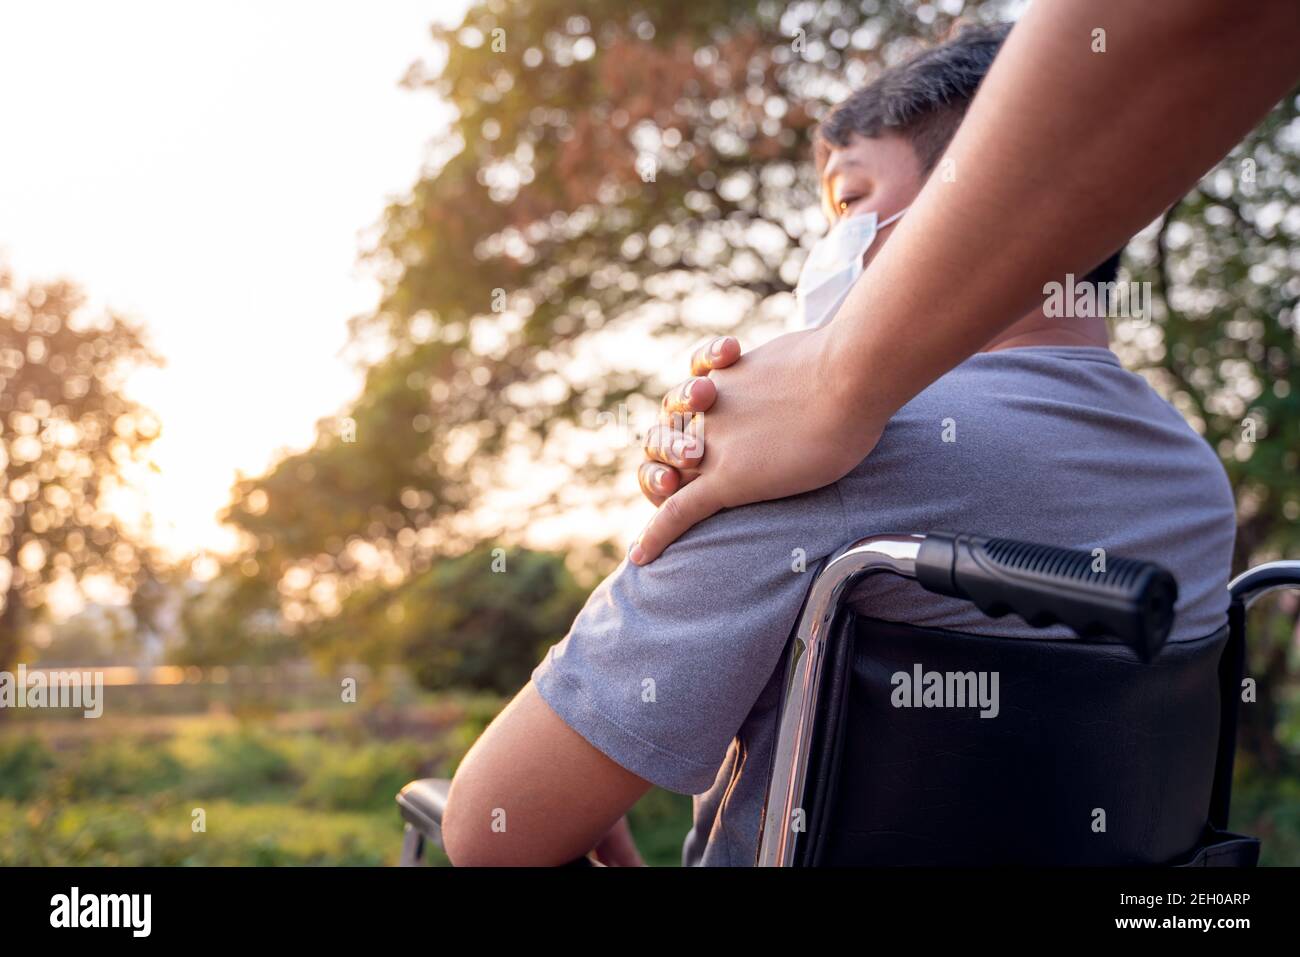 Close up hand patient or disabled man is sitting in wheelchair and young son on a walk in spring nature. Stock Photo